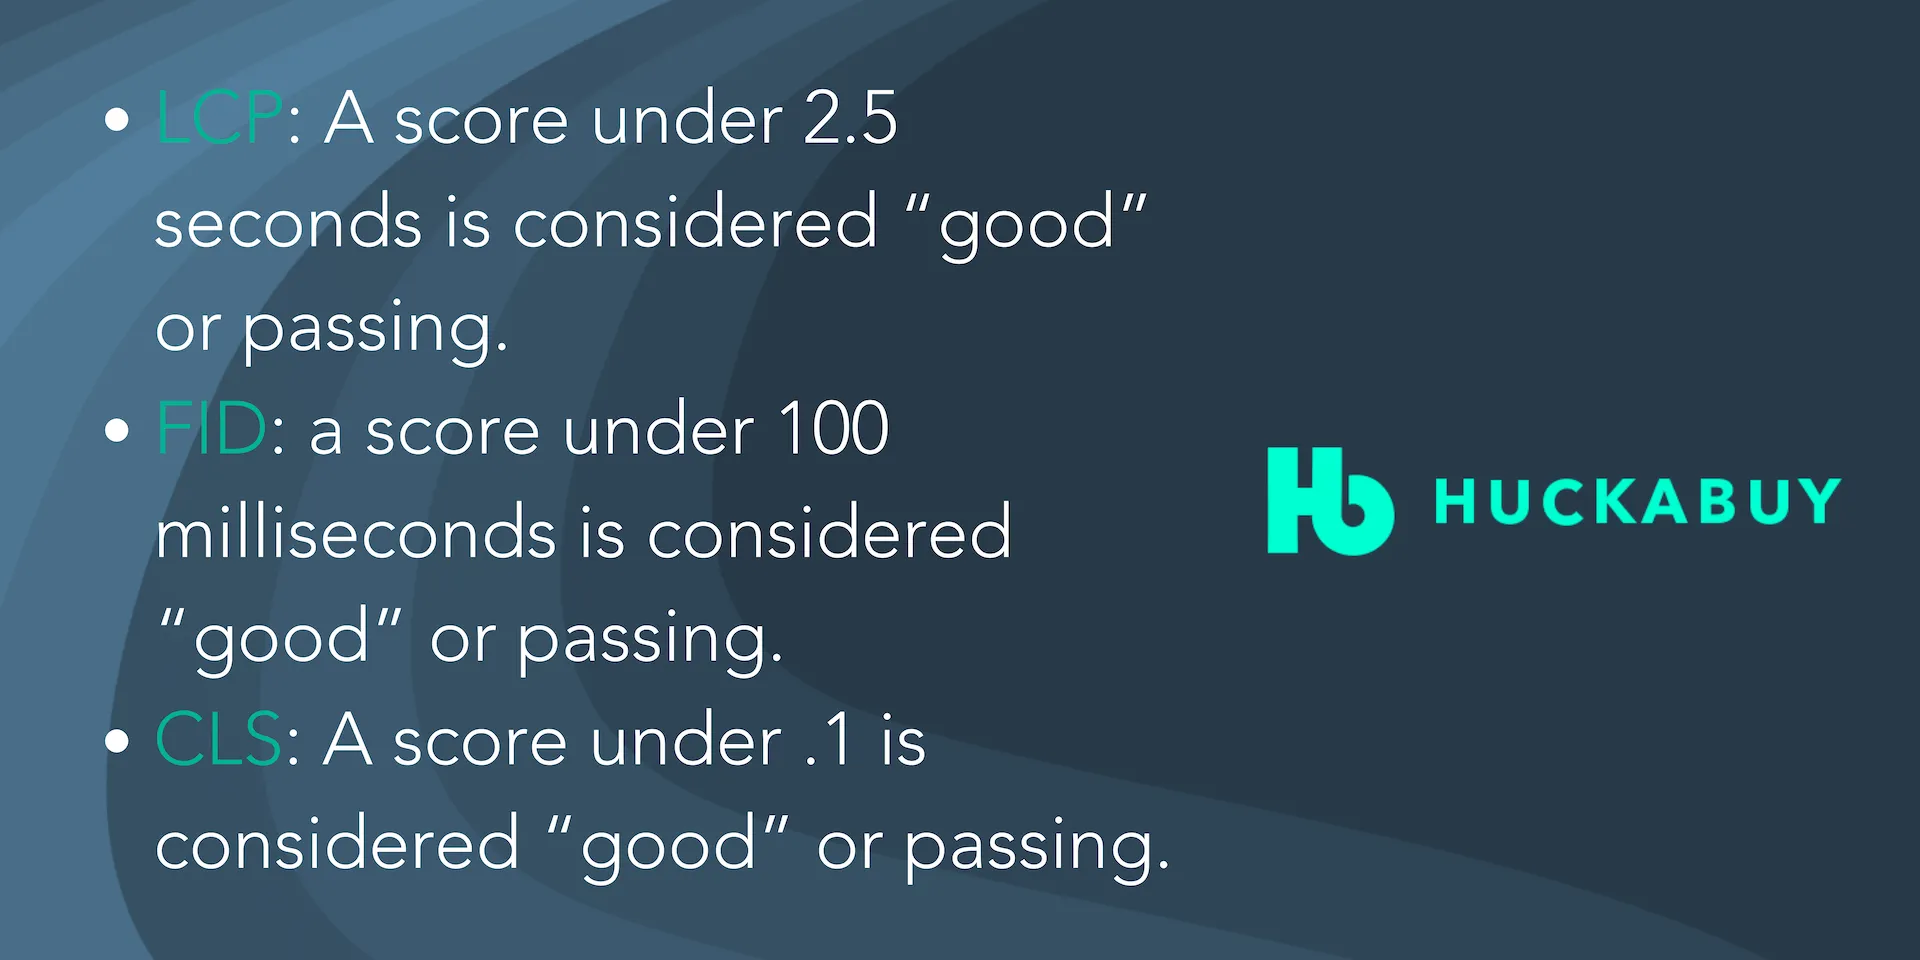 LCP: A score under 2.5 seconds is considered good or passing. FID: a score under 100 milliseconds is considered good or passing. CLS: A score under .1 is considered good or passing.